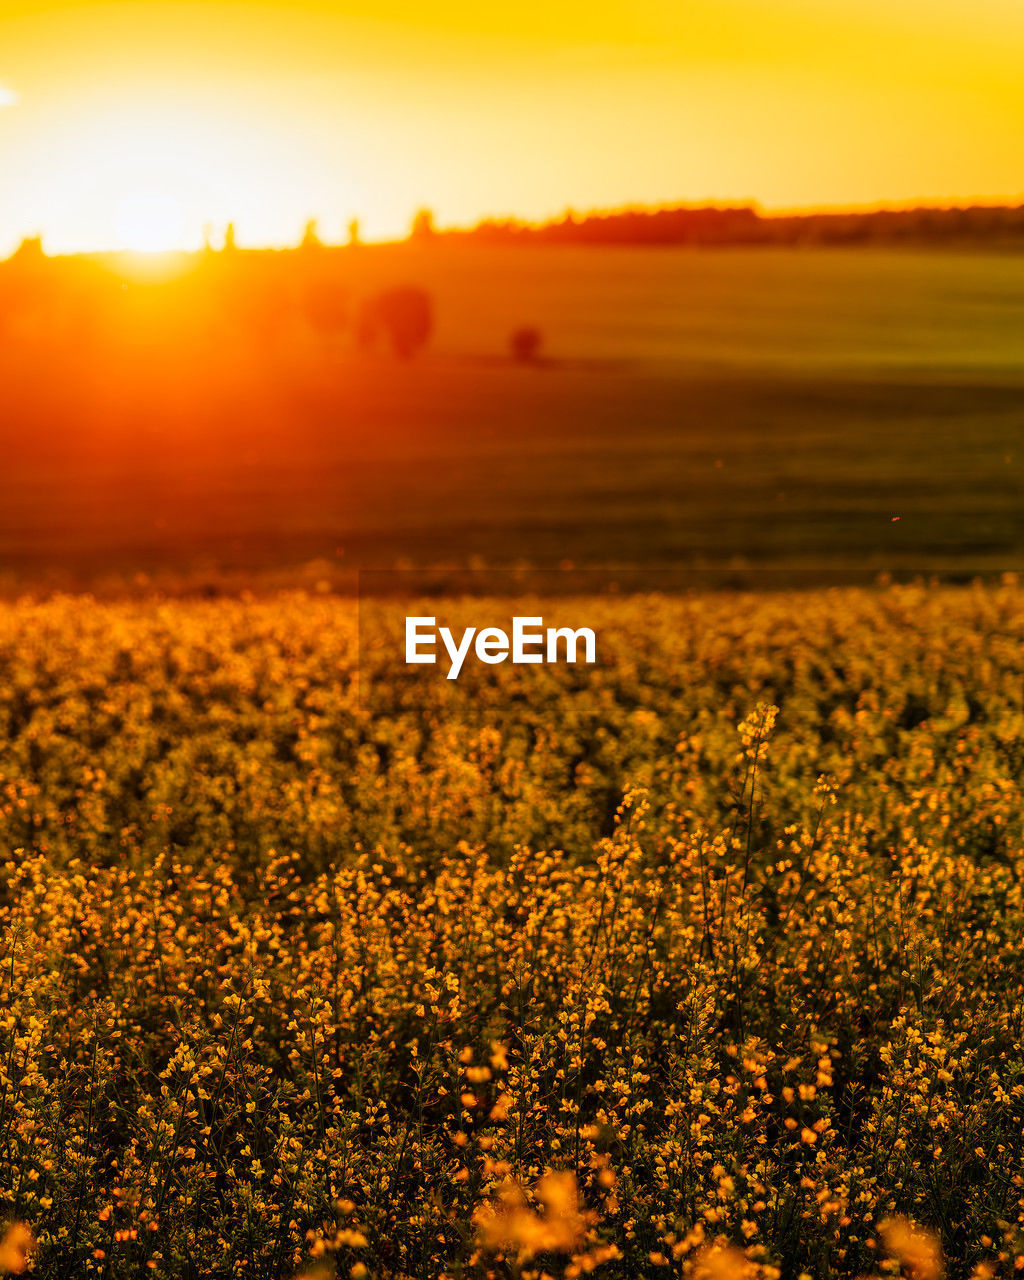 sky, landscape, sunset, beauty in nature, environment, yellow, plant, nature, land, scenics - nature, field, tranquility, sunlight, sun, horizon, tranquil scene, rural scene, agriculture, no people, orange color, gold, flower, freshness, idyllic, vibrant color, outdoors, cloud, flowering plant, growth, dramatic sky, non-urban scene, summer, sunbeam, grass, crop, multi colored, back lit, urban skyline, plain, farm, food, meadow, horizon over land, dusk, backgrounds, lens flare, twilight, travel destinations, springtime, prairie, red